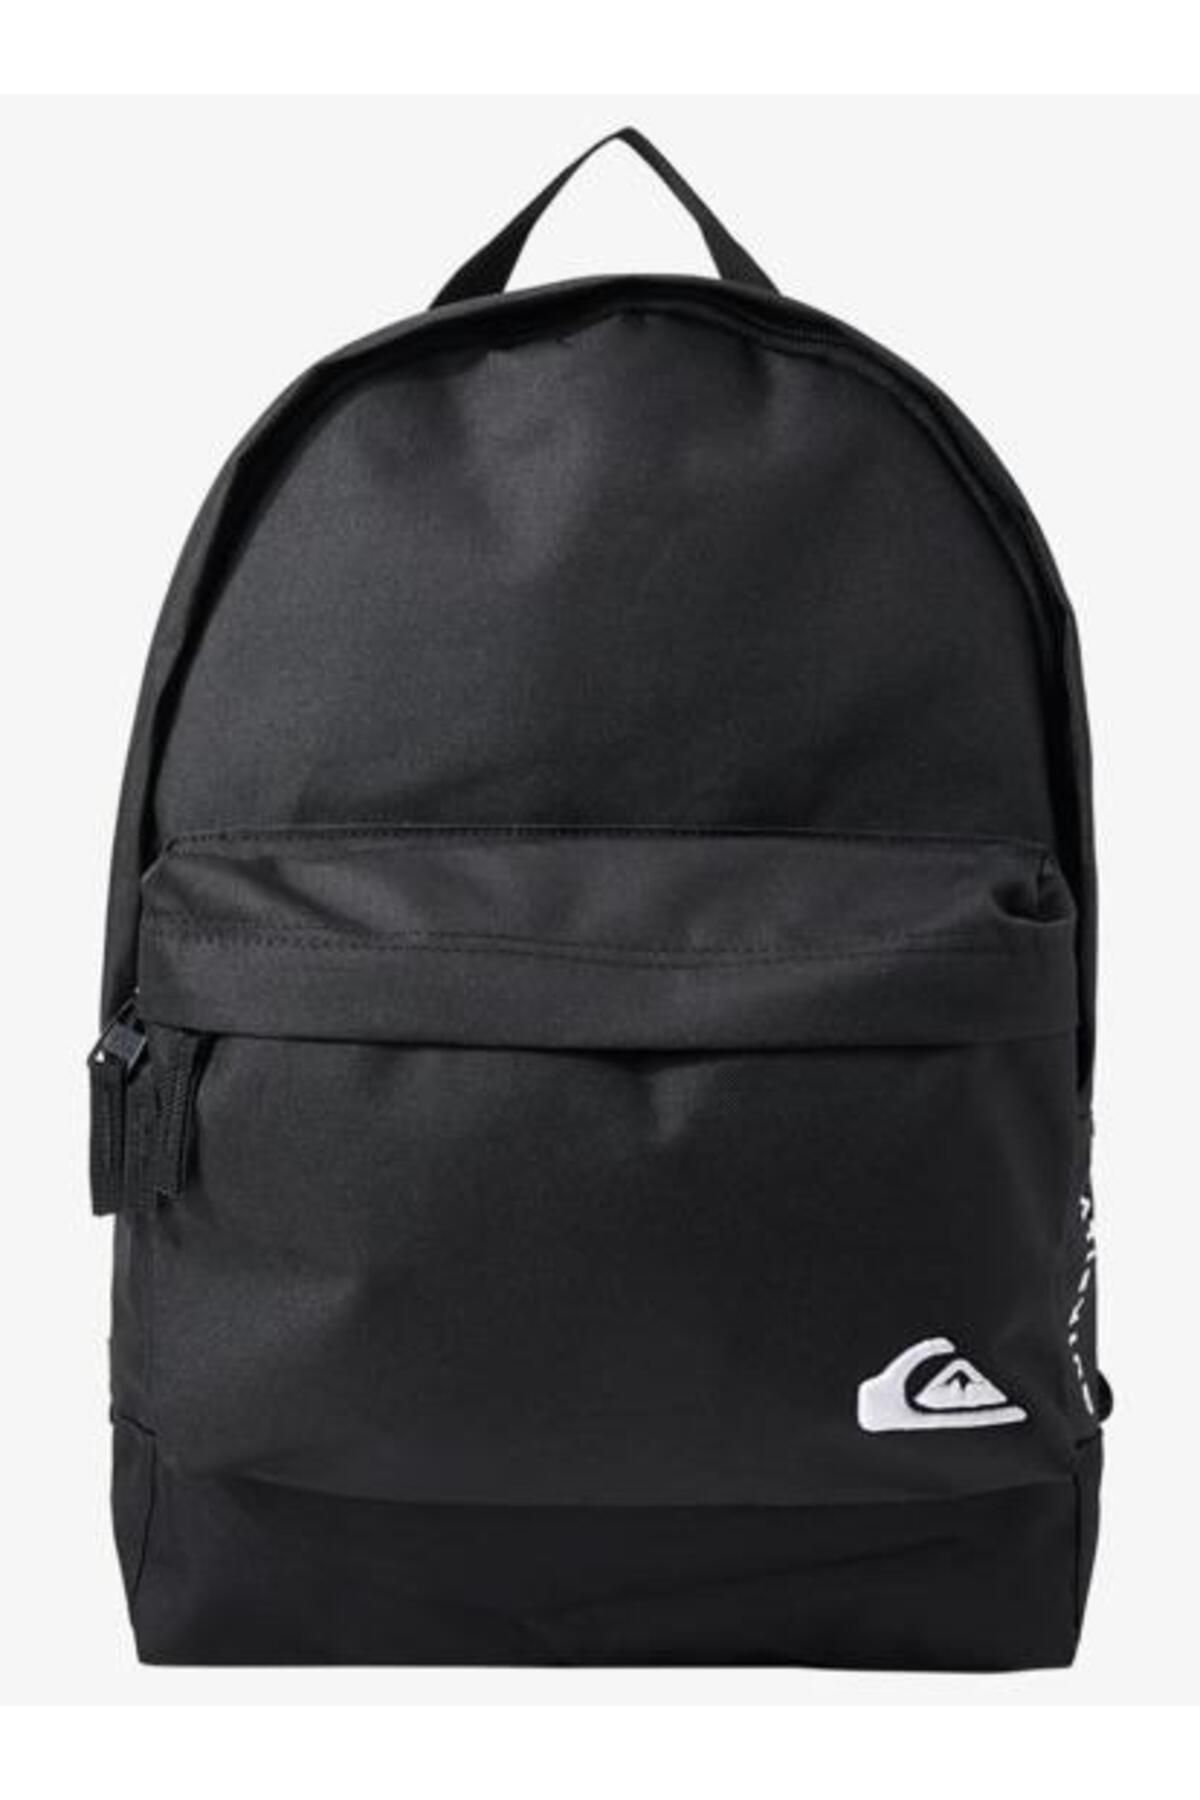 Quiksilver Small Everyday Edition